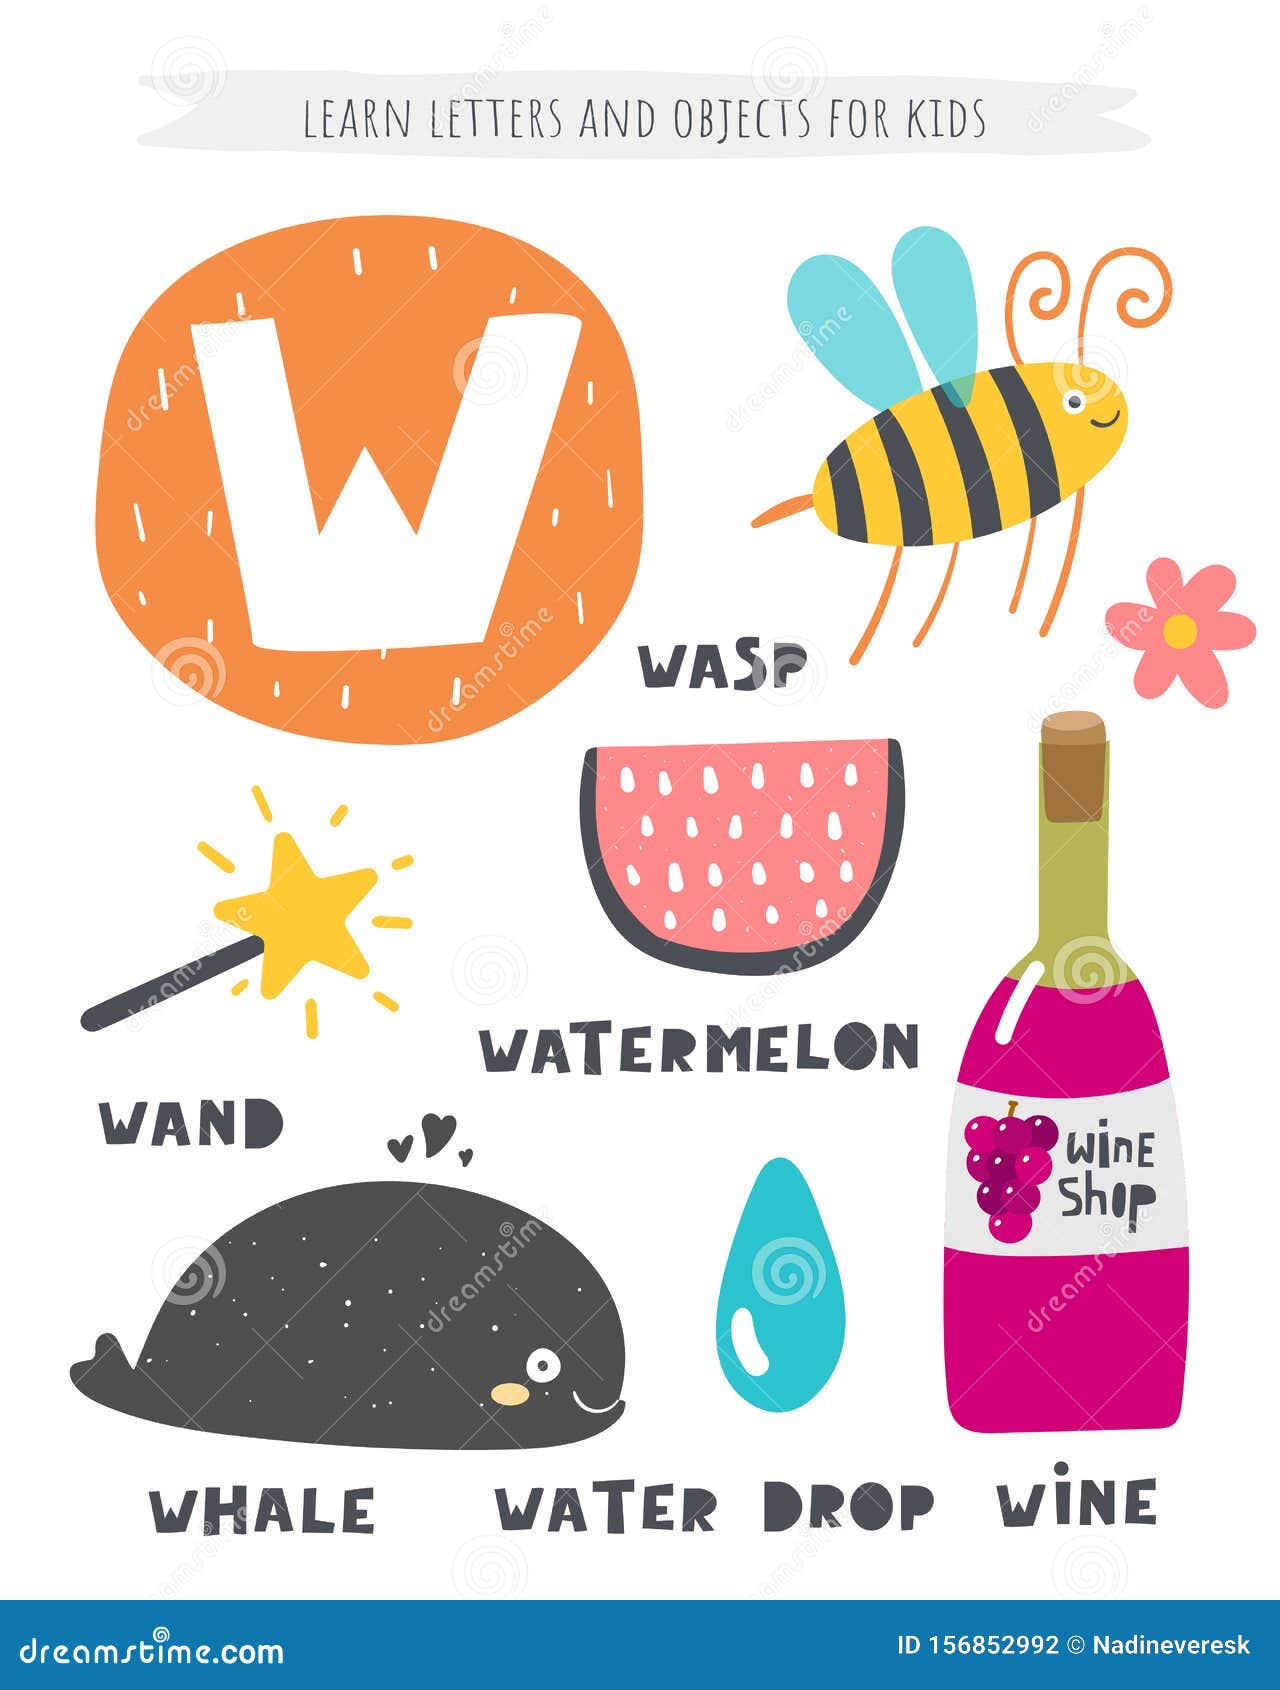 https://thumbs.dreamstime.com/z/w-letter-objects-animals-including-wasp-whale-wand-watermelon-wine-water-drop-learn-english-alphabet-letters-words-kids-156852992.jpg